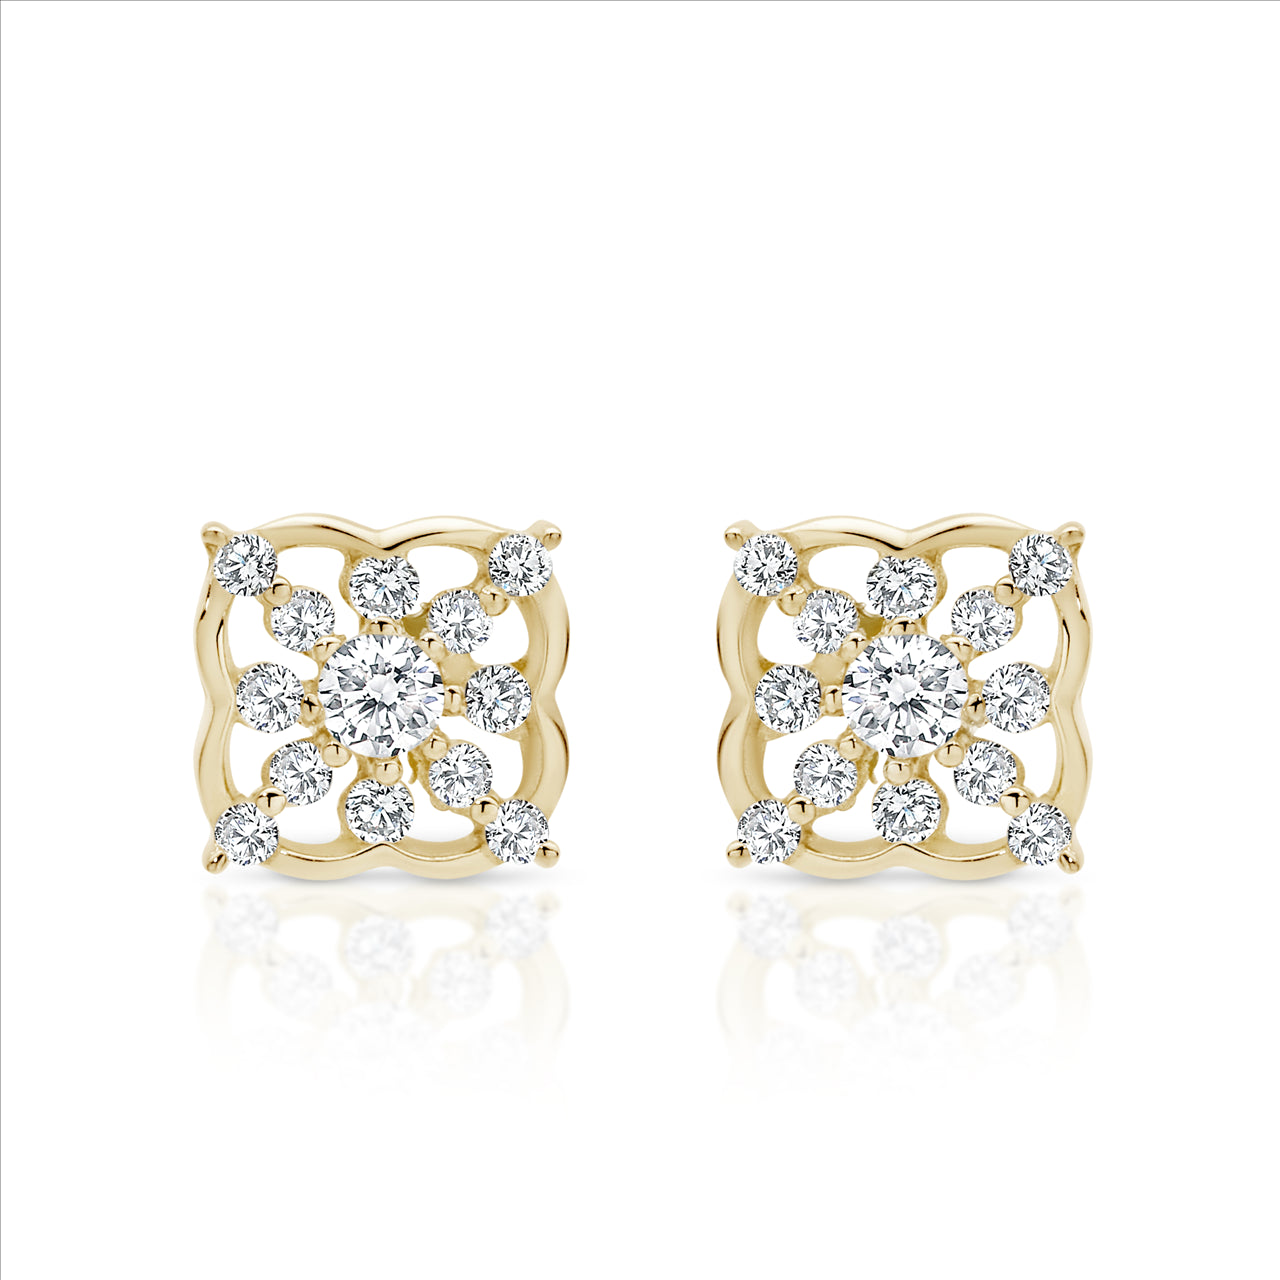 Cubic Zirconia Vintage Inspired Stud Earrings 9ct Yellow Gold